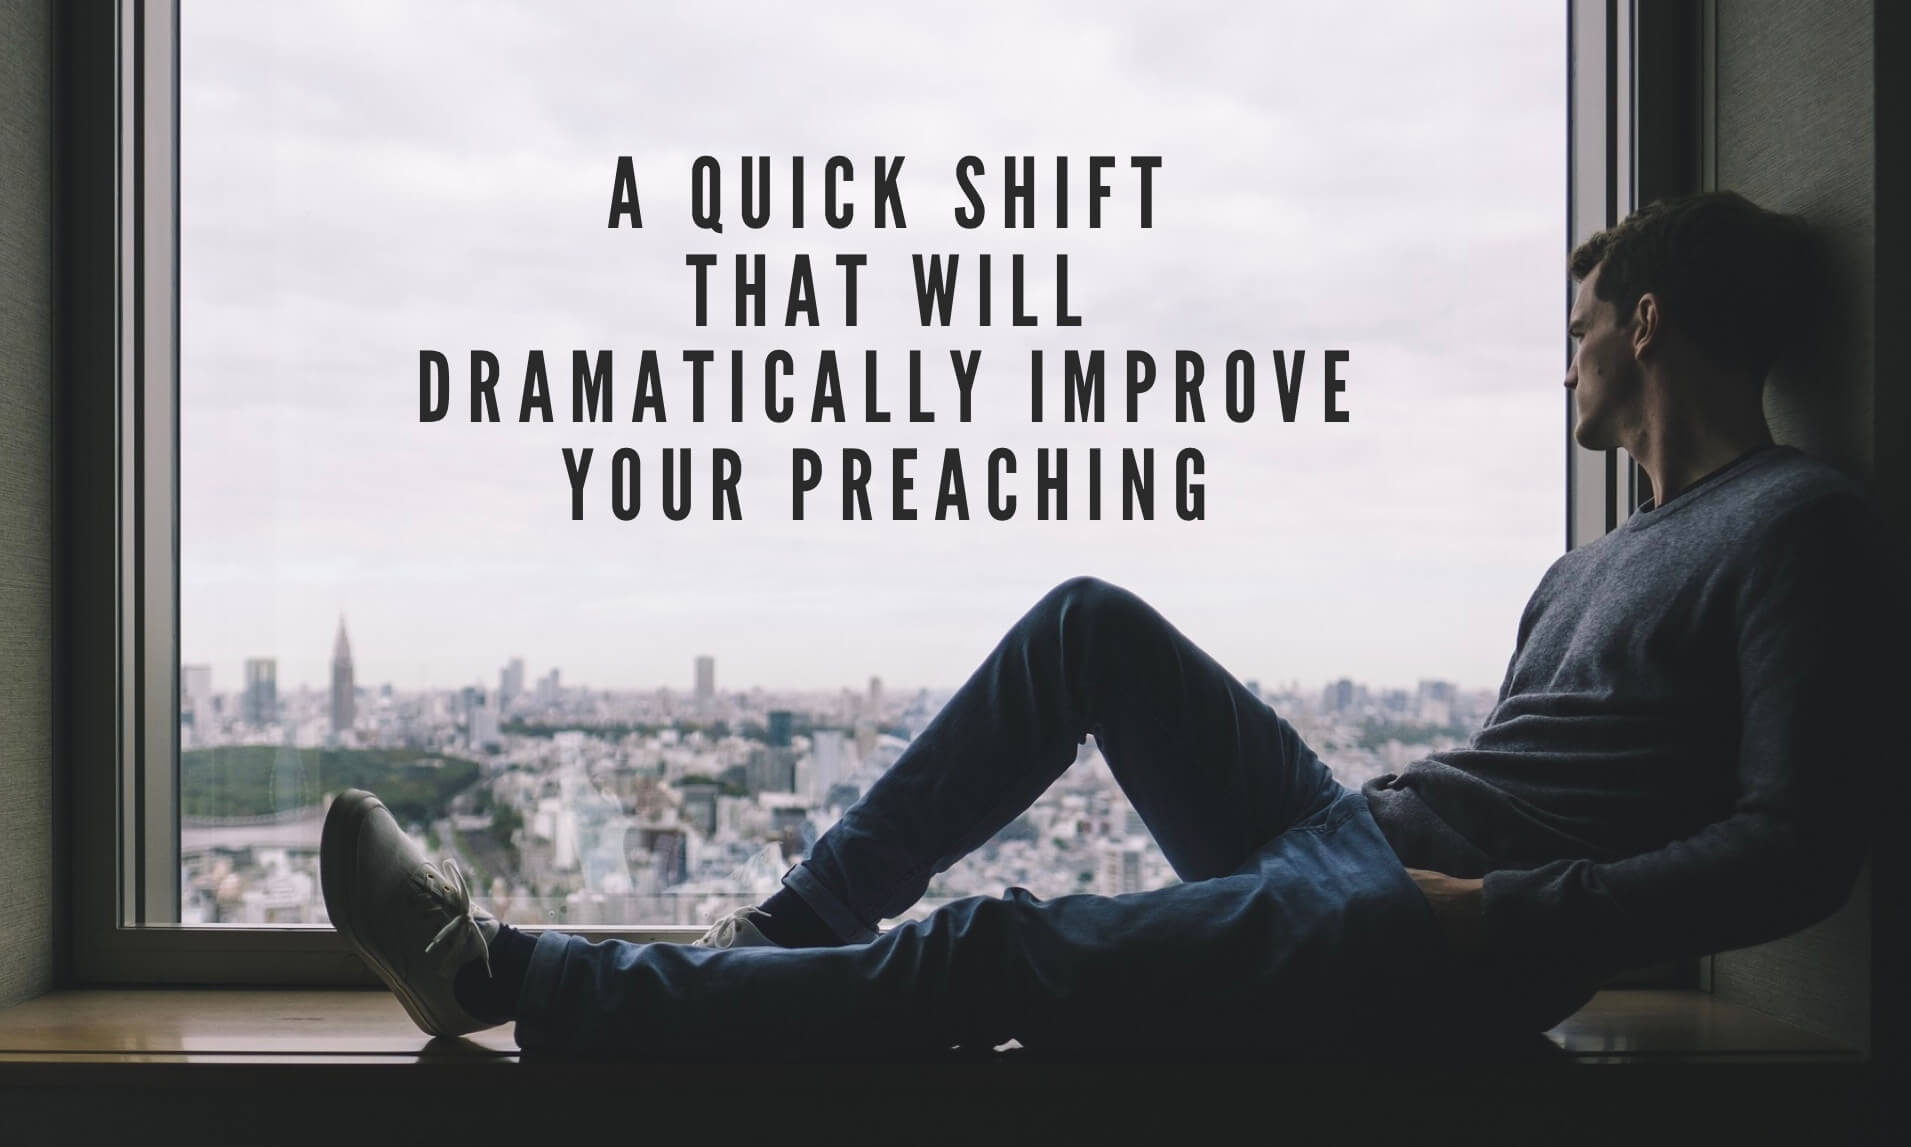 A Quick Shift That Will Dramatically Improve Your Preaching